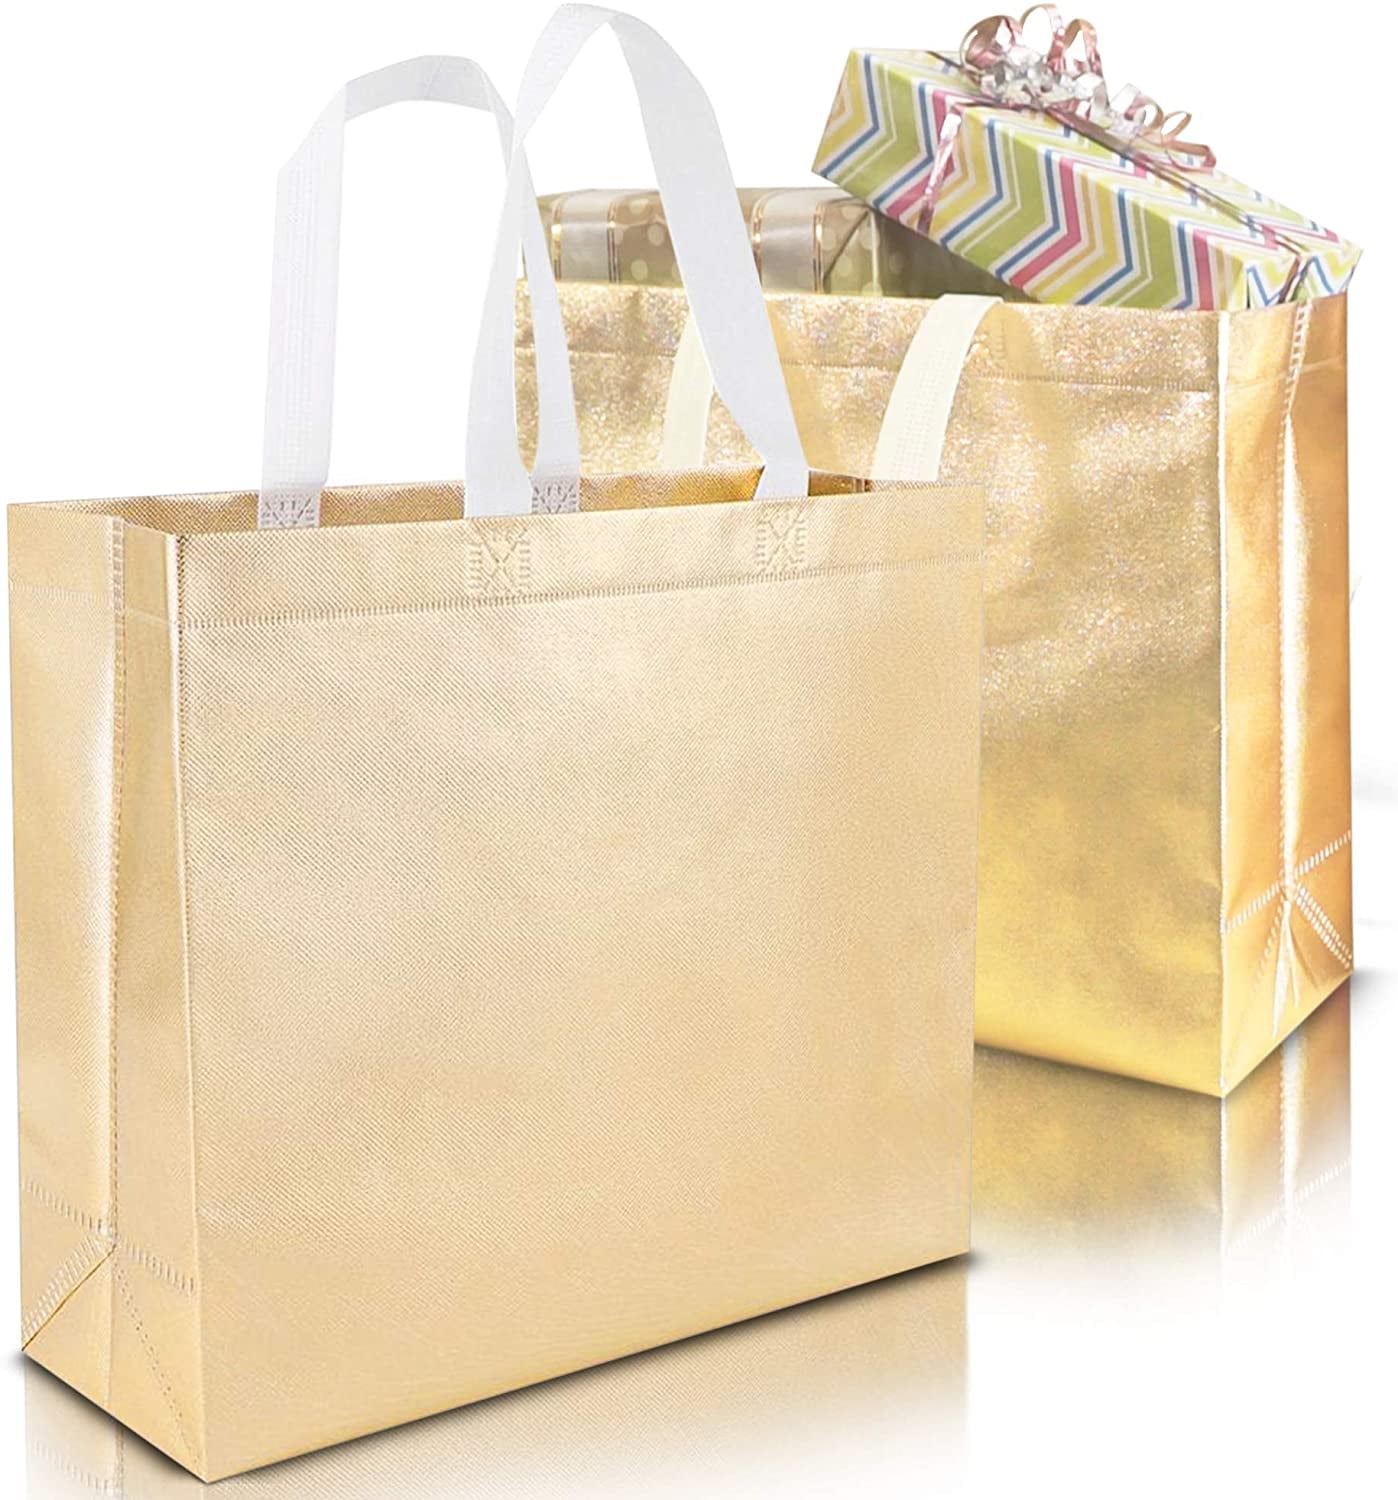 Bellagio Las Vegas Tote Bag Reusable Gym Yoga Lunch Small Tan/Gold Carry-On